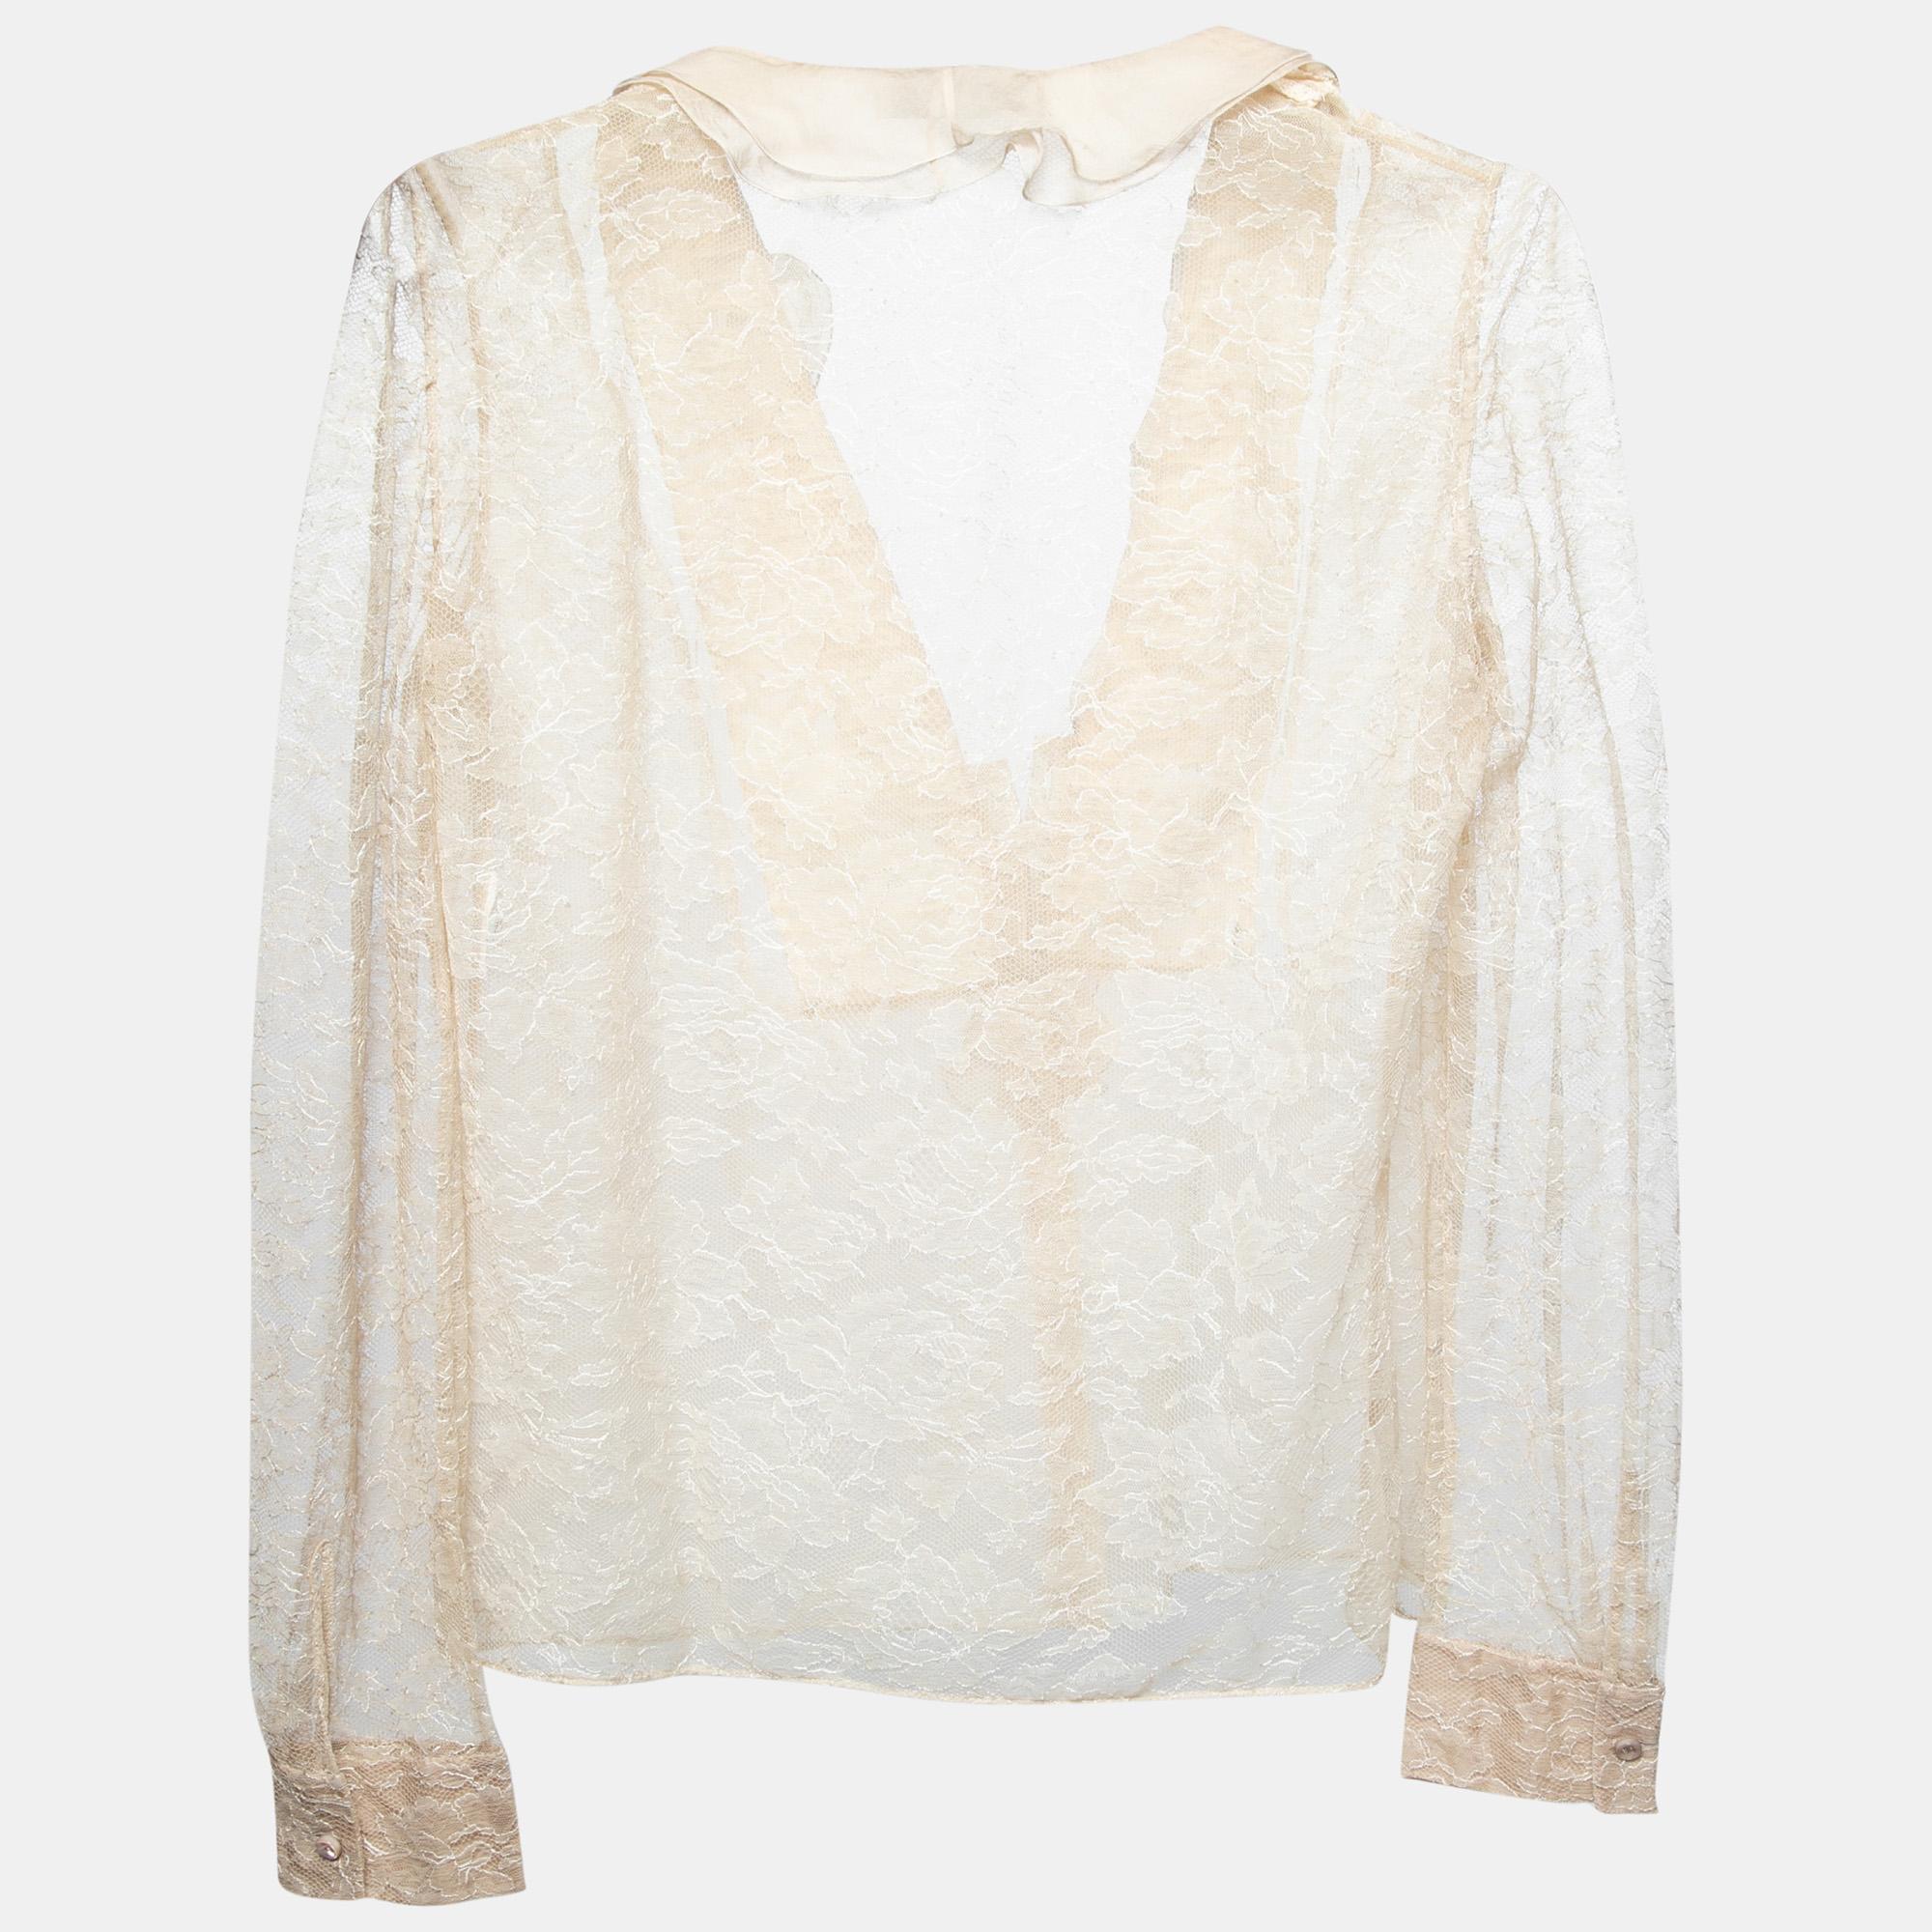 Doesn't this Valentino blouse remind you of a romantic getaway or a sweet summer day? Well, with its beautifully tailored lace silhouette and soft beige color, it surely does. To add more femininity and ease, ruffled trims, frontal buttoned